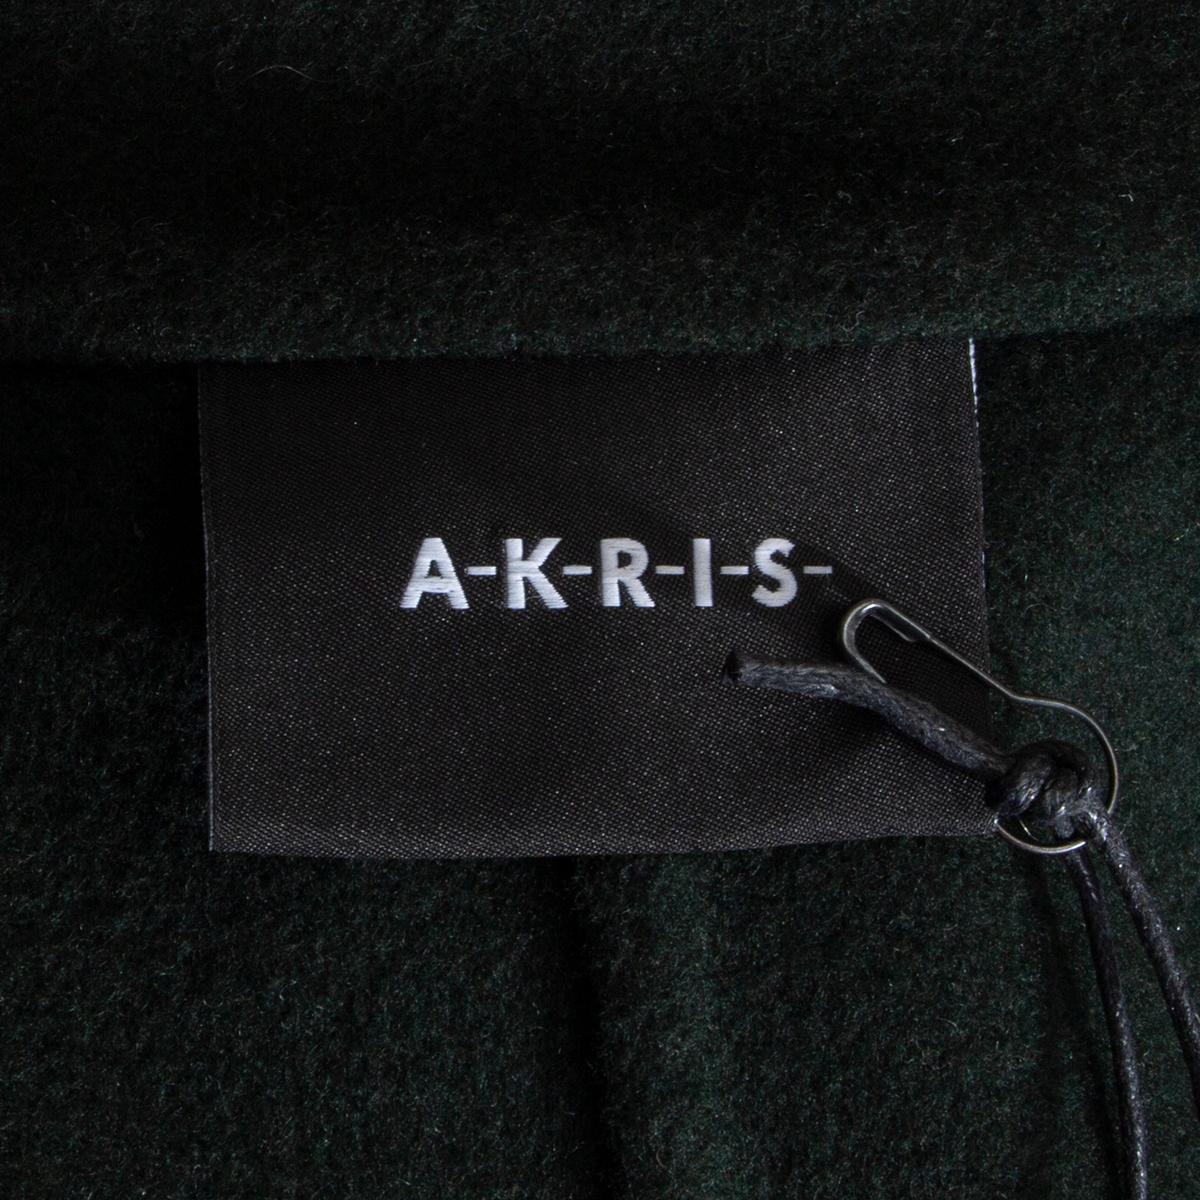 AKRIS forest green cashmere KNIT RAGLAN SLEEVE Coat Jacket 36 S In Excellent Condition For Sale In Zürich, CH